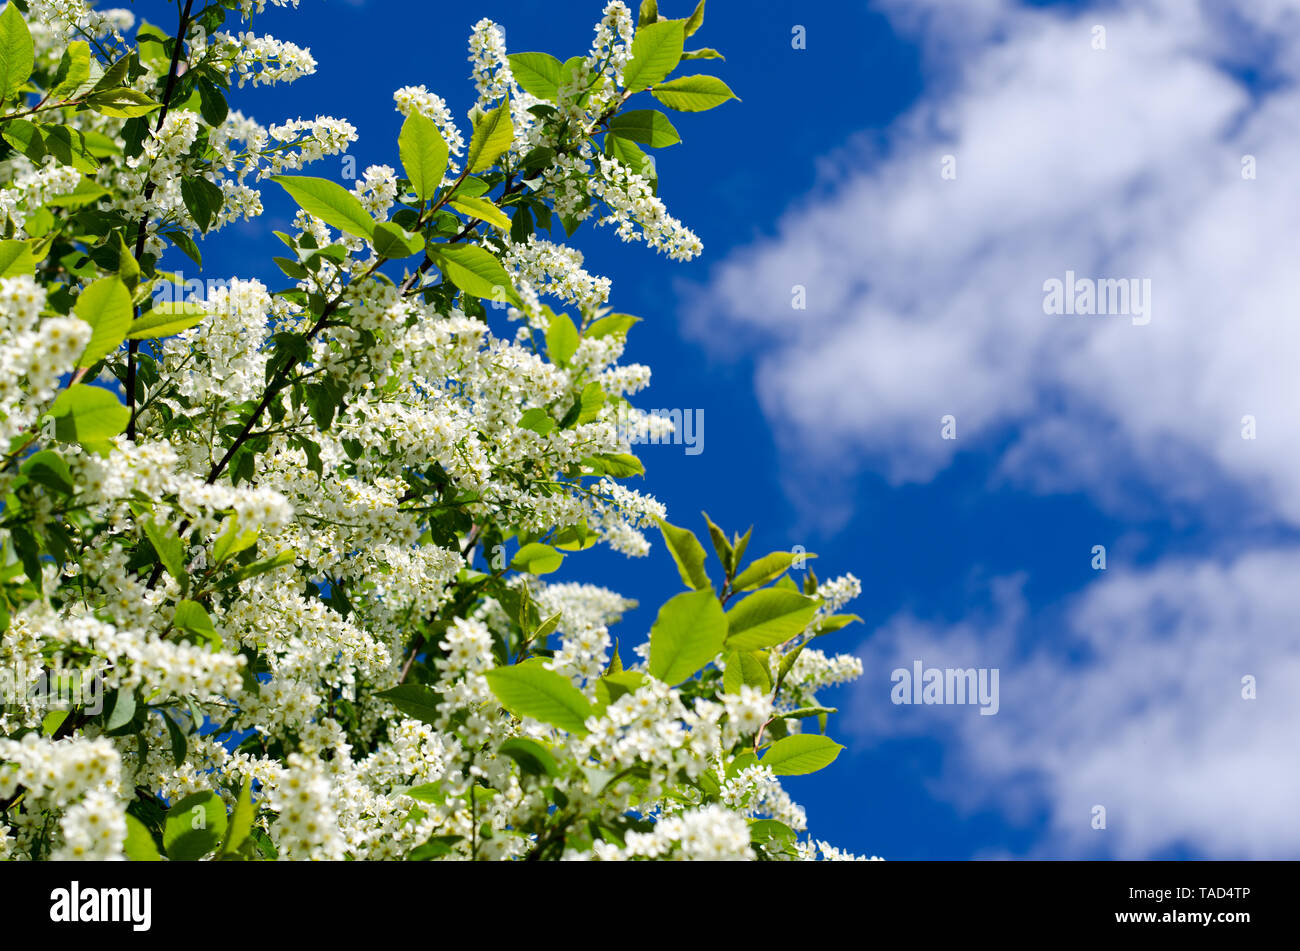 Prunus padus, also known as bird cherry, hackberry, hagberry, or Mayday tree, outside in the sunny weather with blue sky in the background. Stock Photo